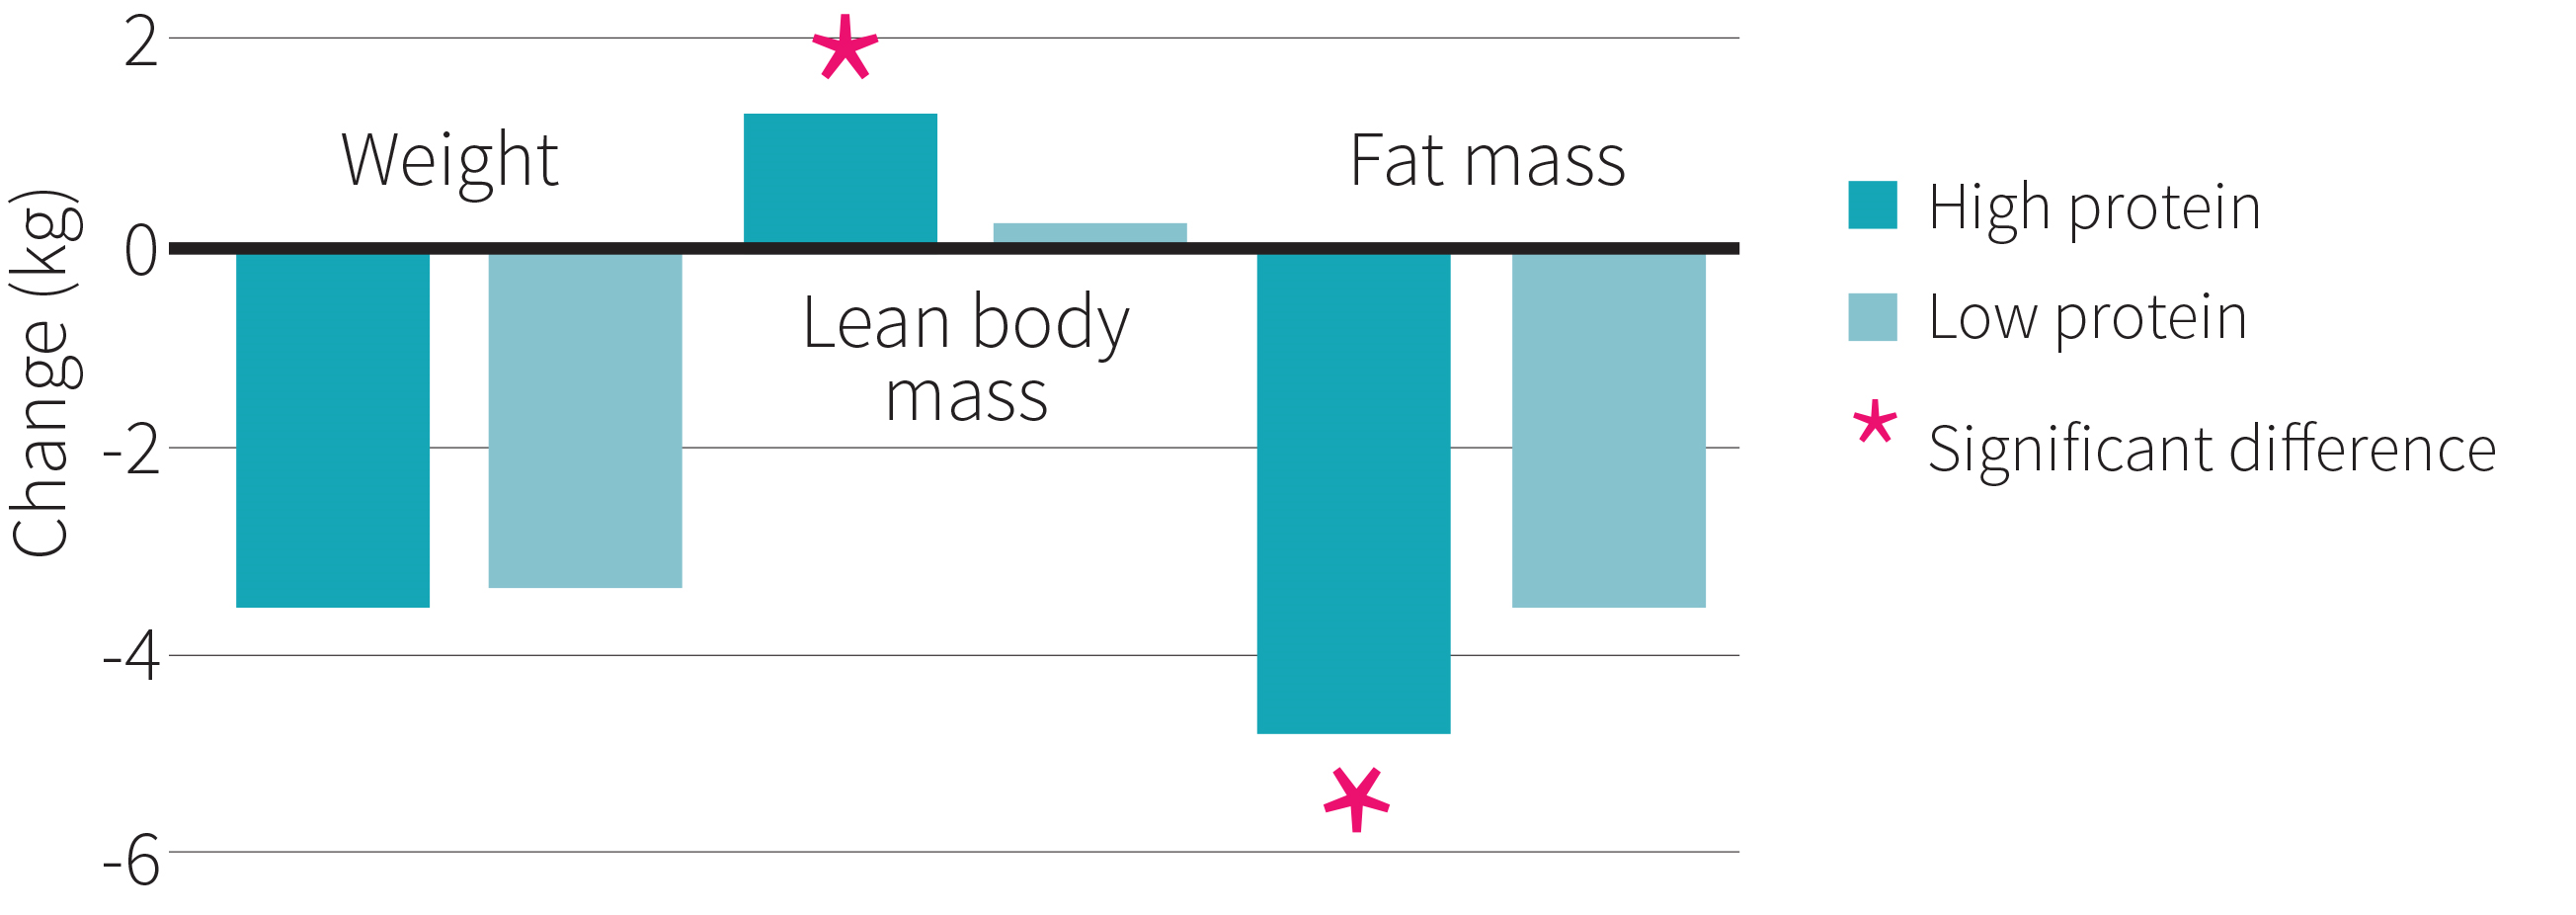 HOW TO LOSS FAT?